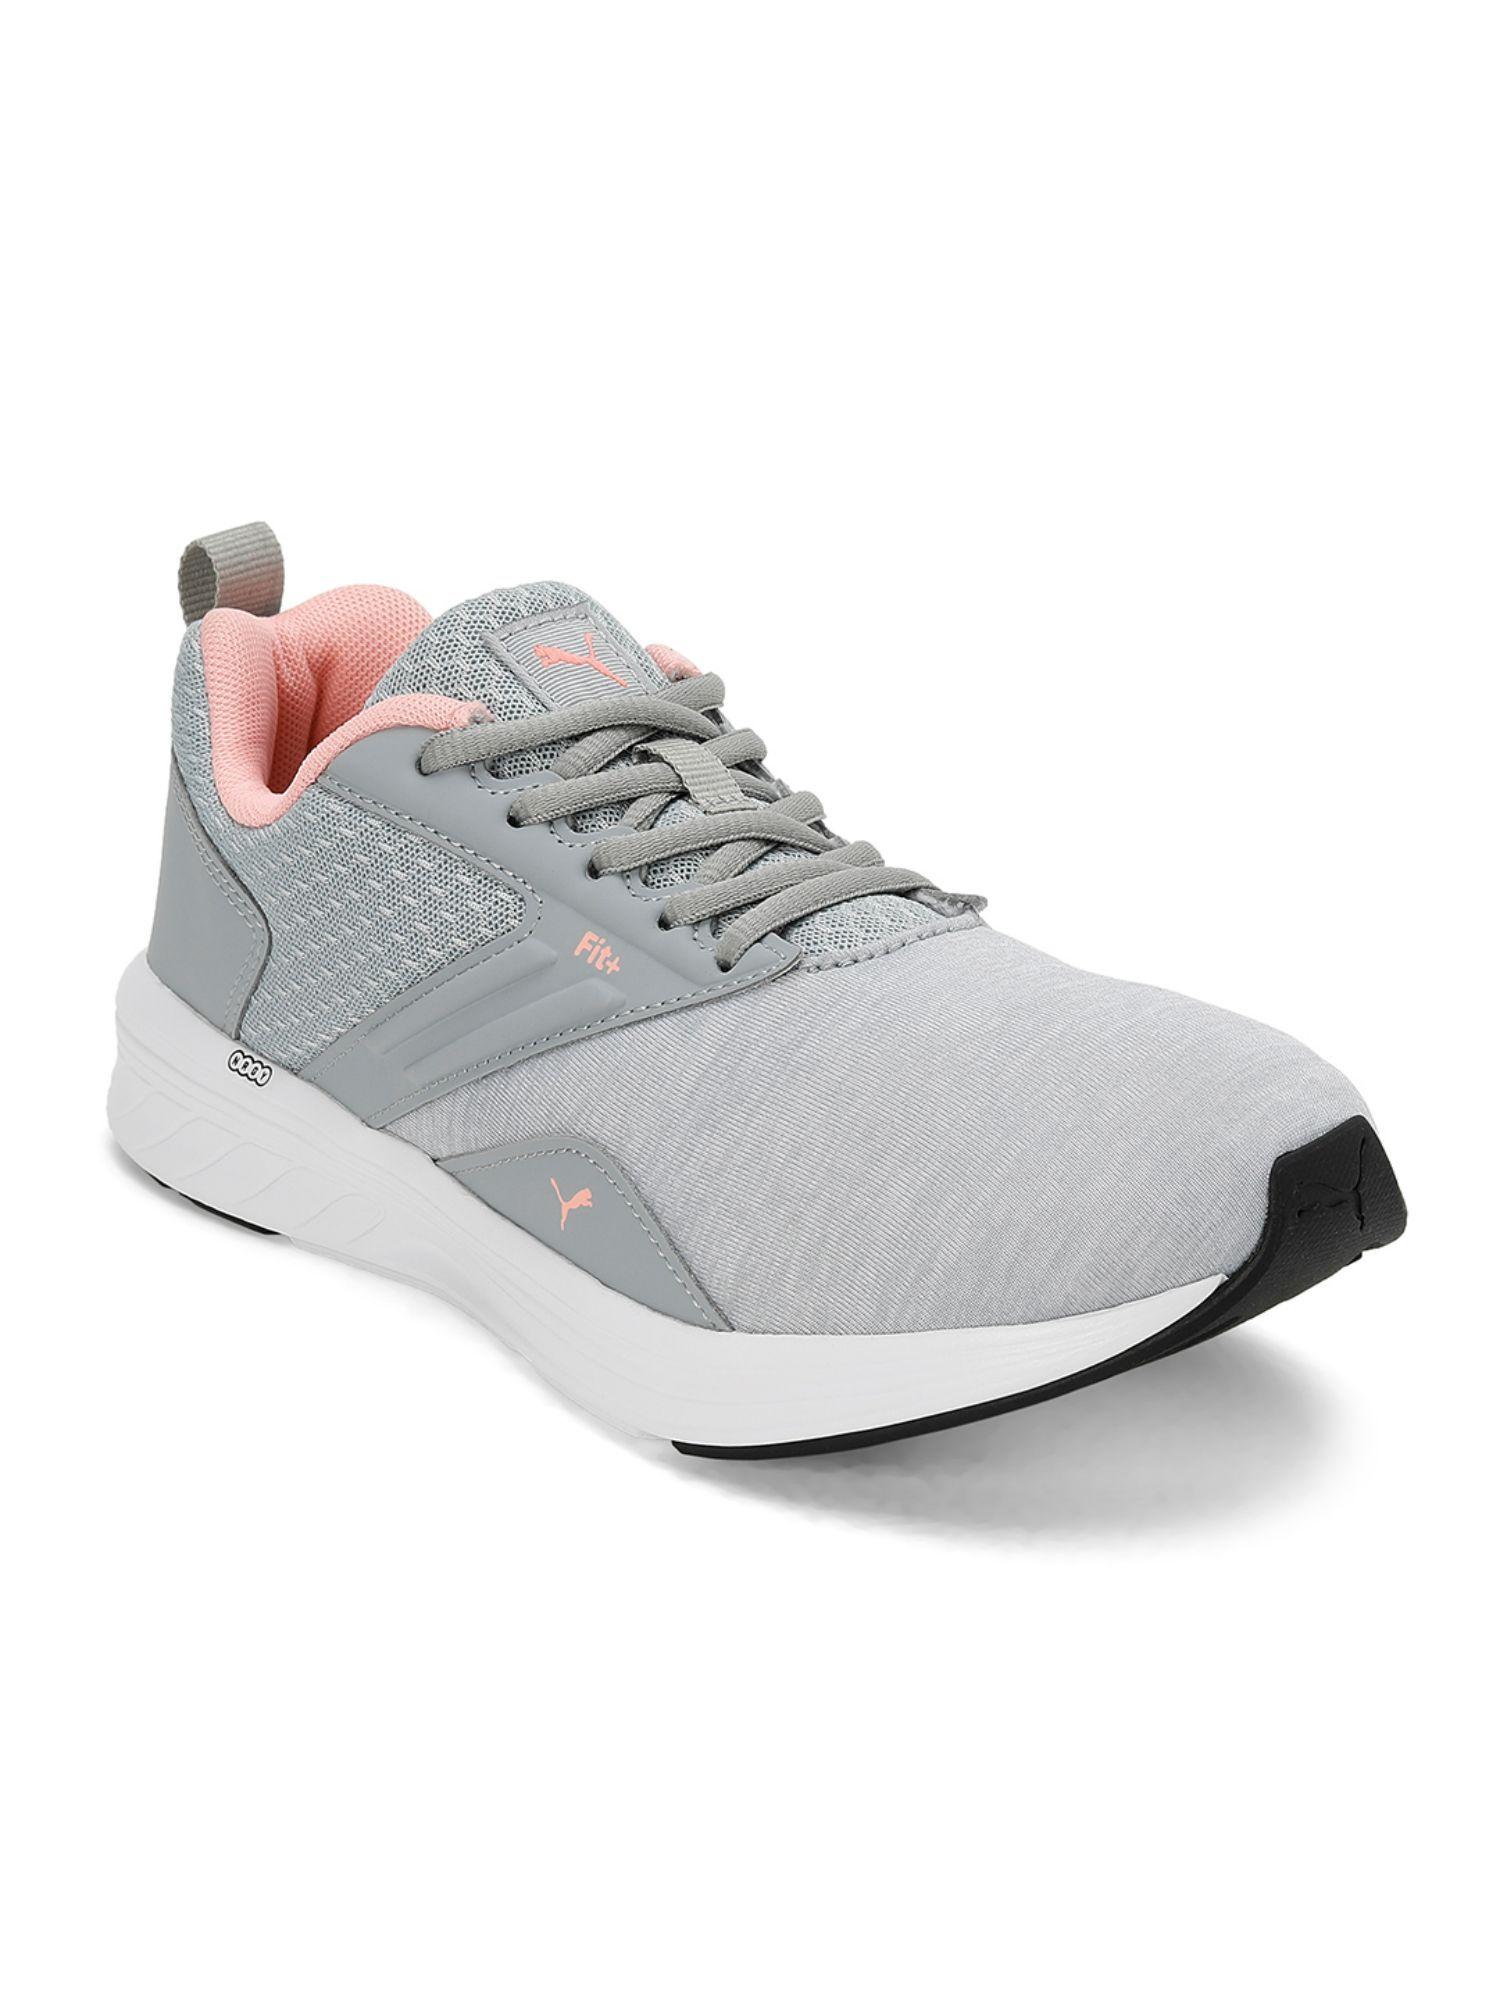 nrgy-comet-unisex-grey-running-shoes